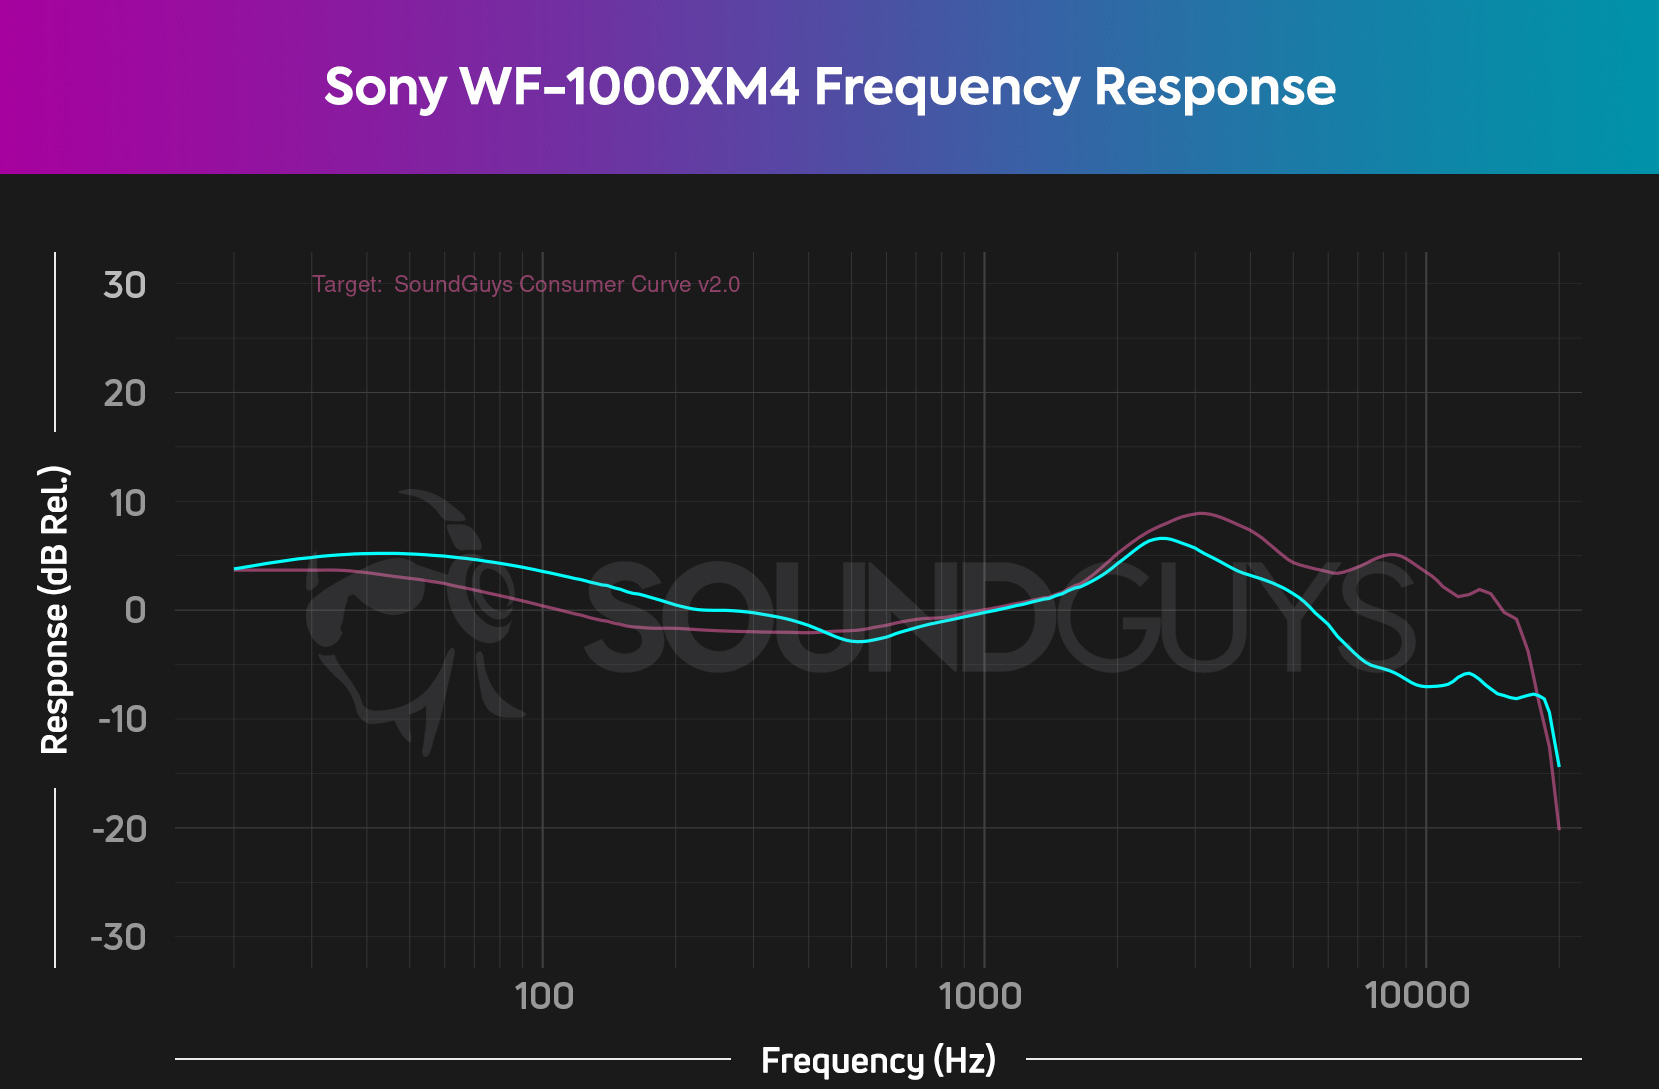 A chart showing the frequency response of the Sony WF-1000XM4 true wireless earphones compared to the SoundGuys house curve.